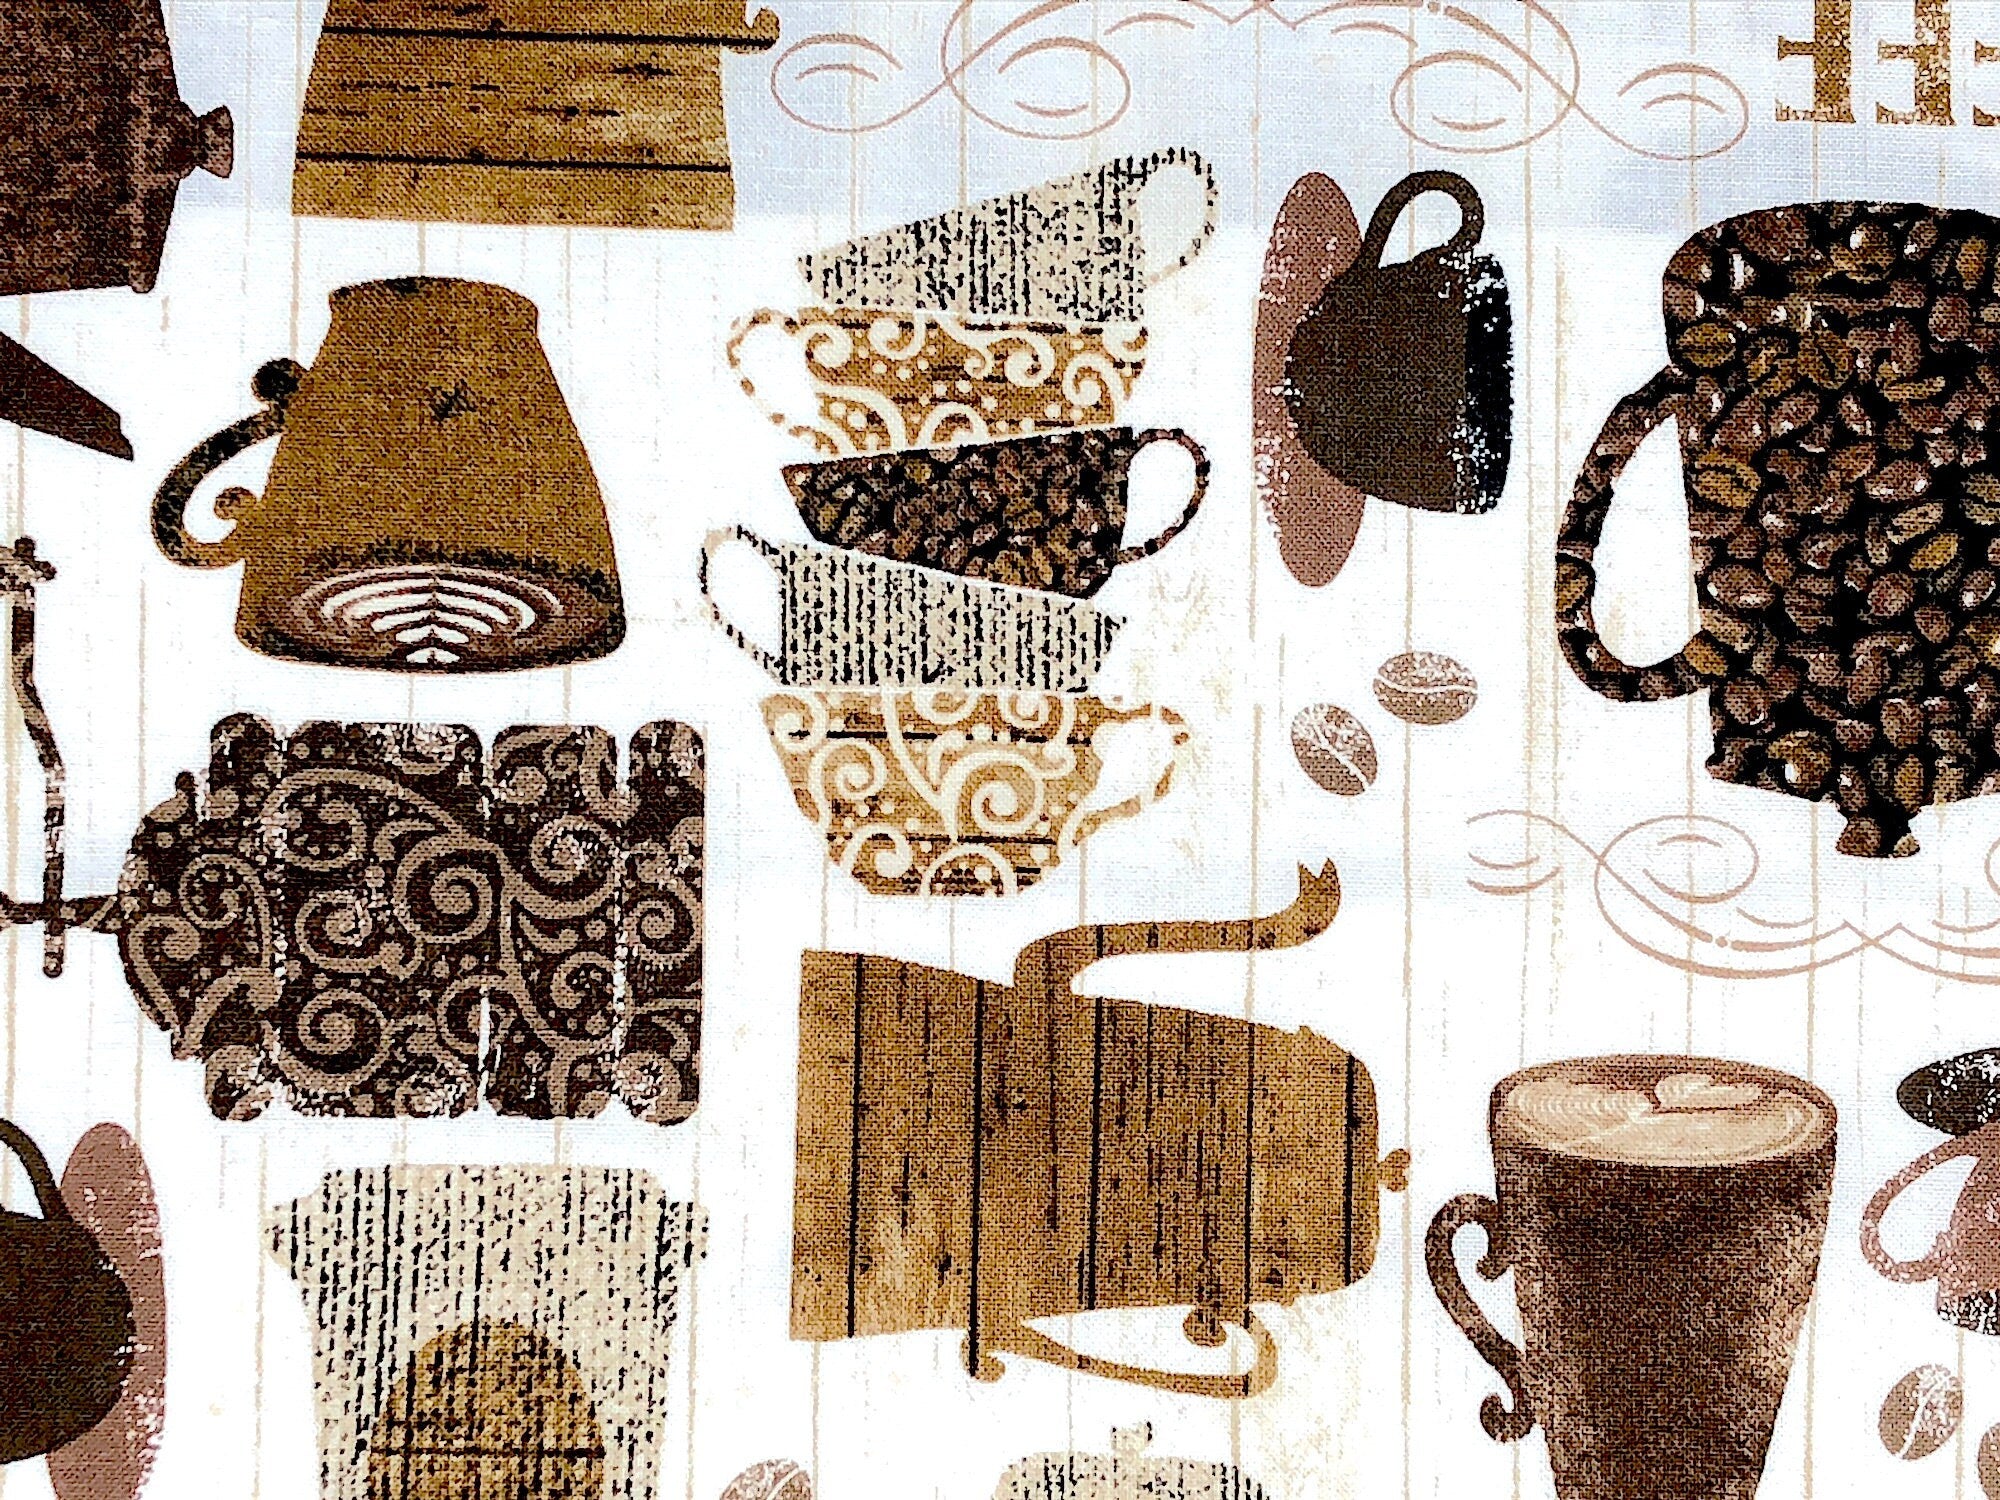 Close up of coffee pots, coffee cups, beans and more.